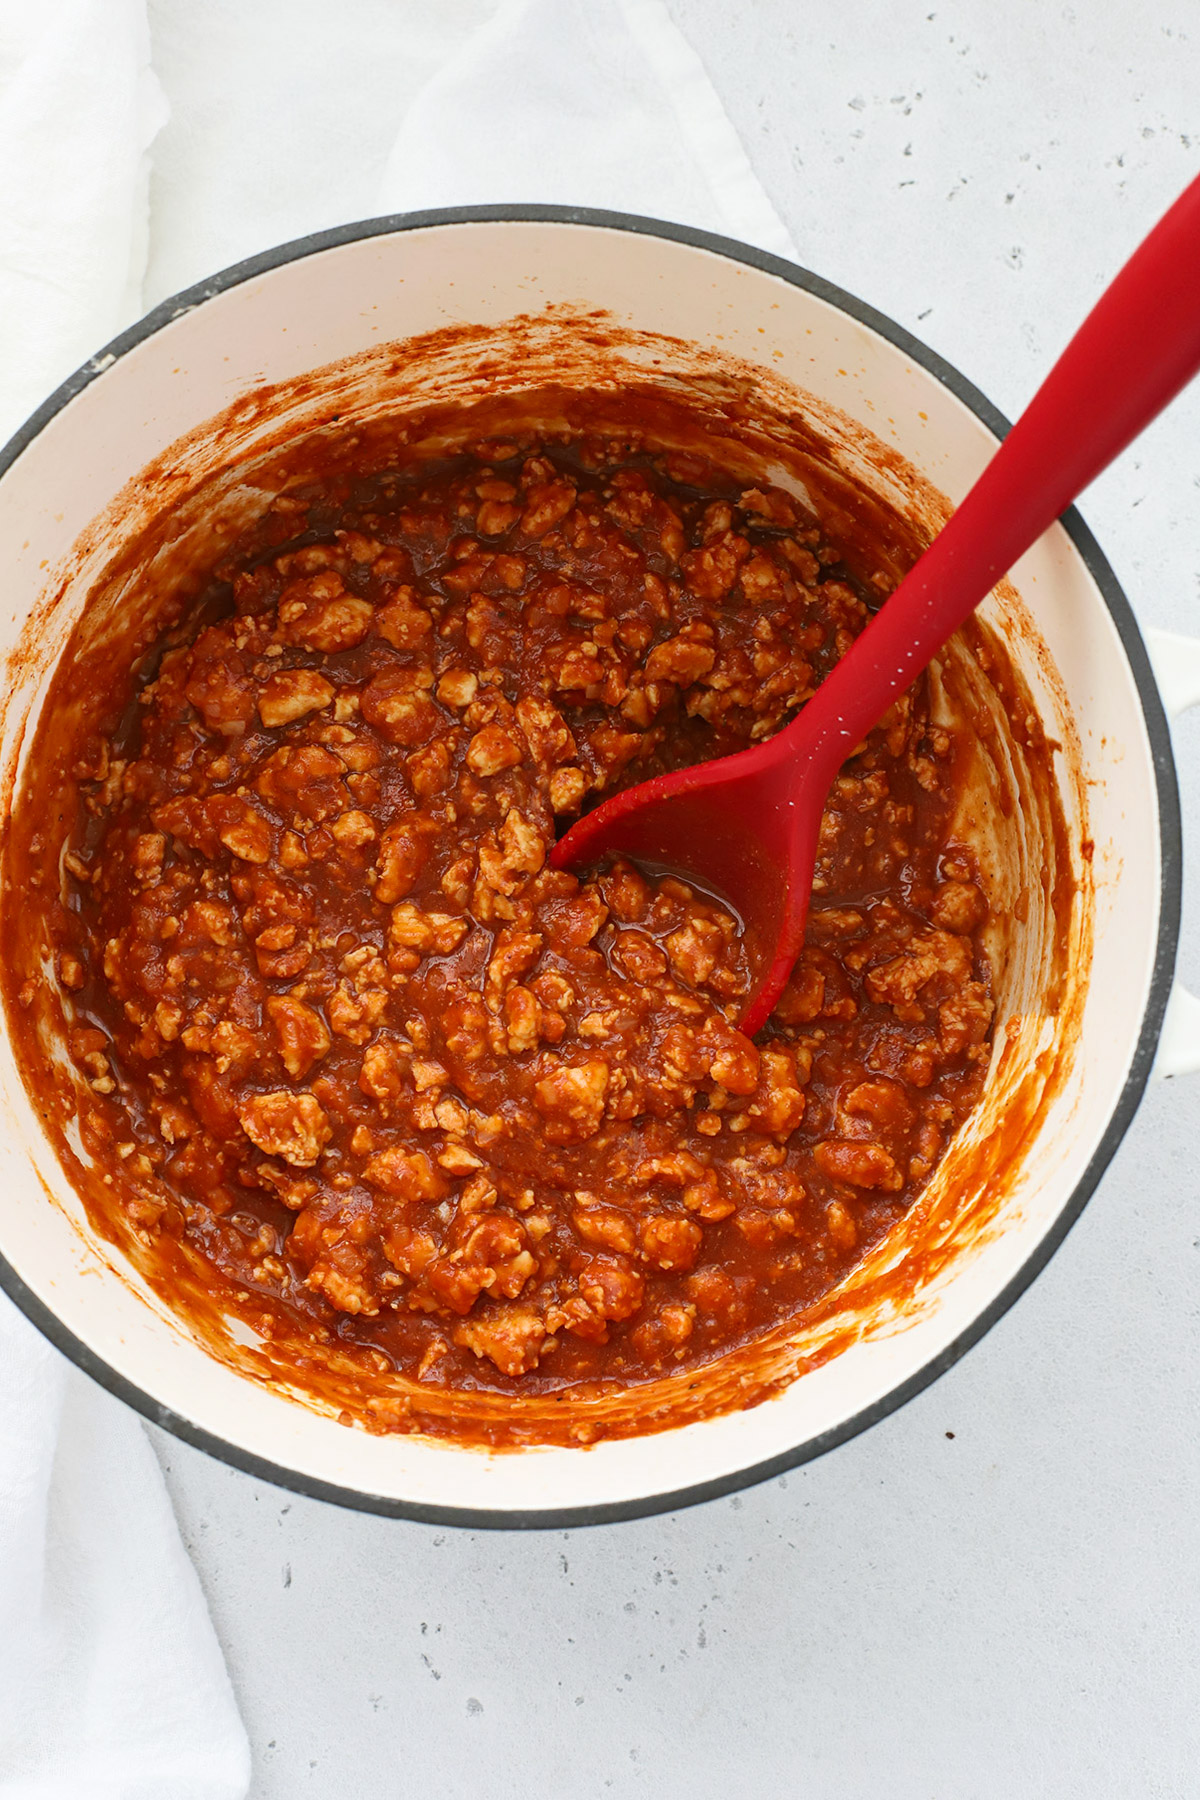 Overhead view of a pot of healthy chicken sloppy joes